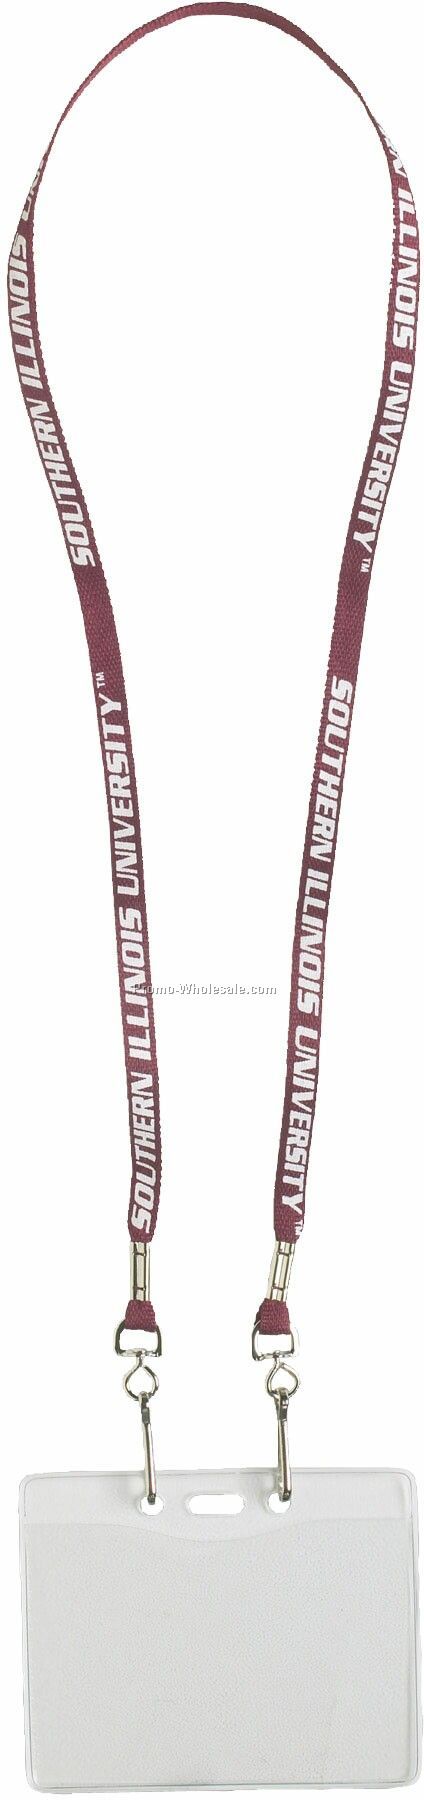 3/8"x34" Fields 1 Ply Cotton Lanyards With 2 Ring